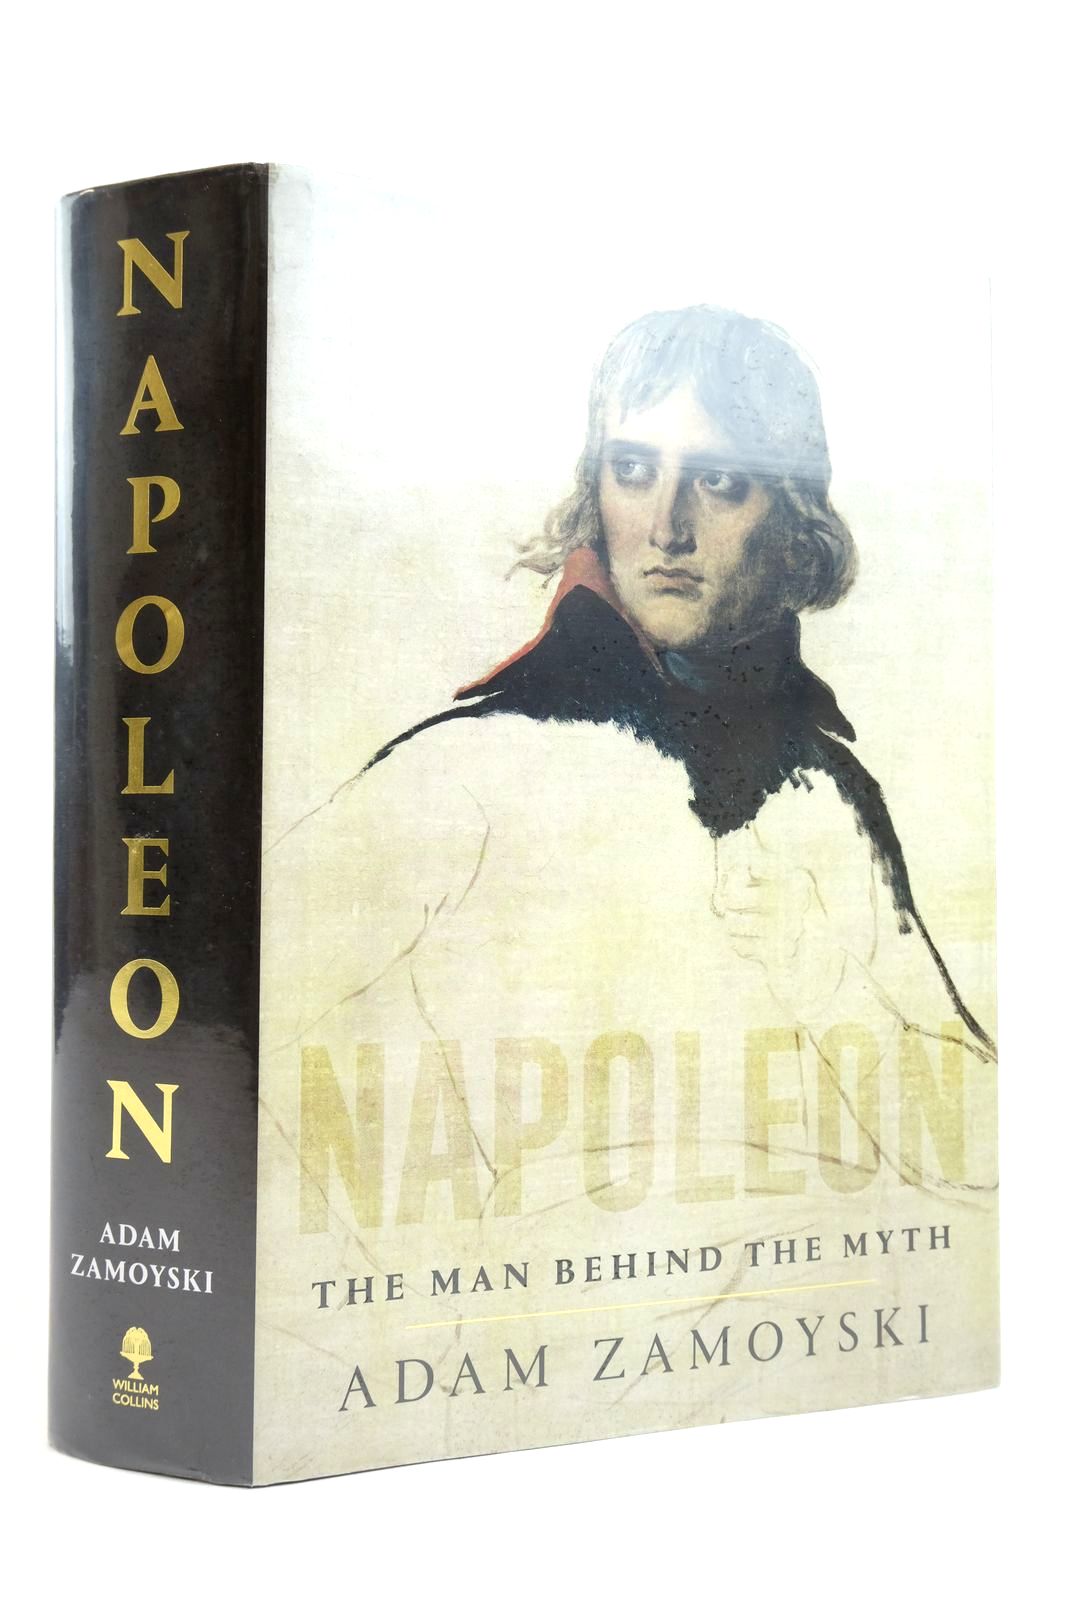 Photo of NAPOLEON: THE MAN BEHIND THE MYTH written by Zamoyski, Adam published by William Collins (STOCK CODE: 2135391)  for sale by Stella & Rose's Books